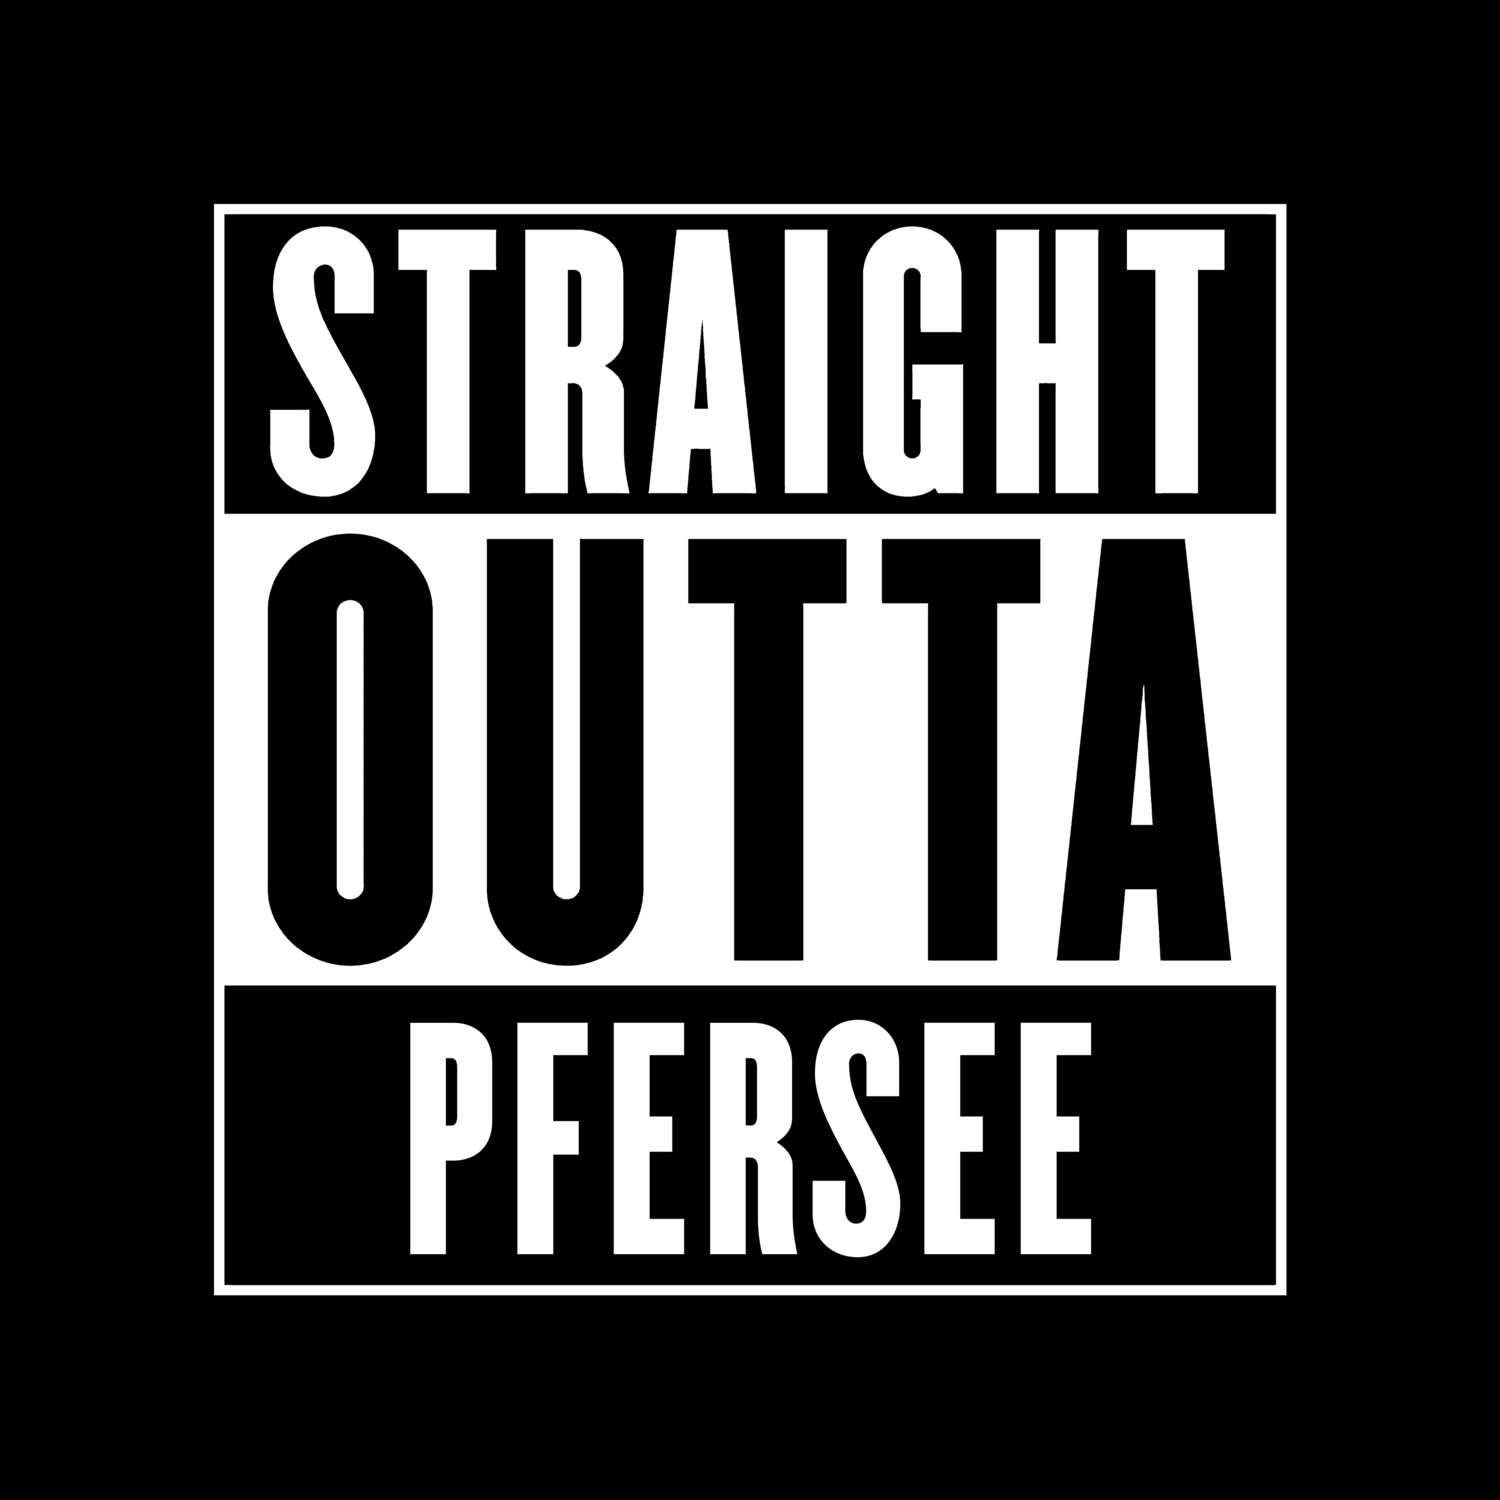 Pfersee T-Shirt »Straight Outta«